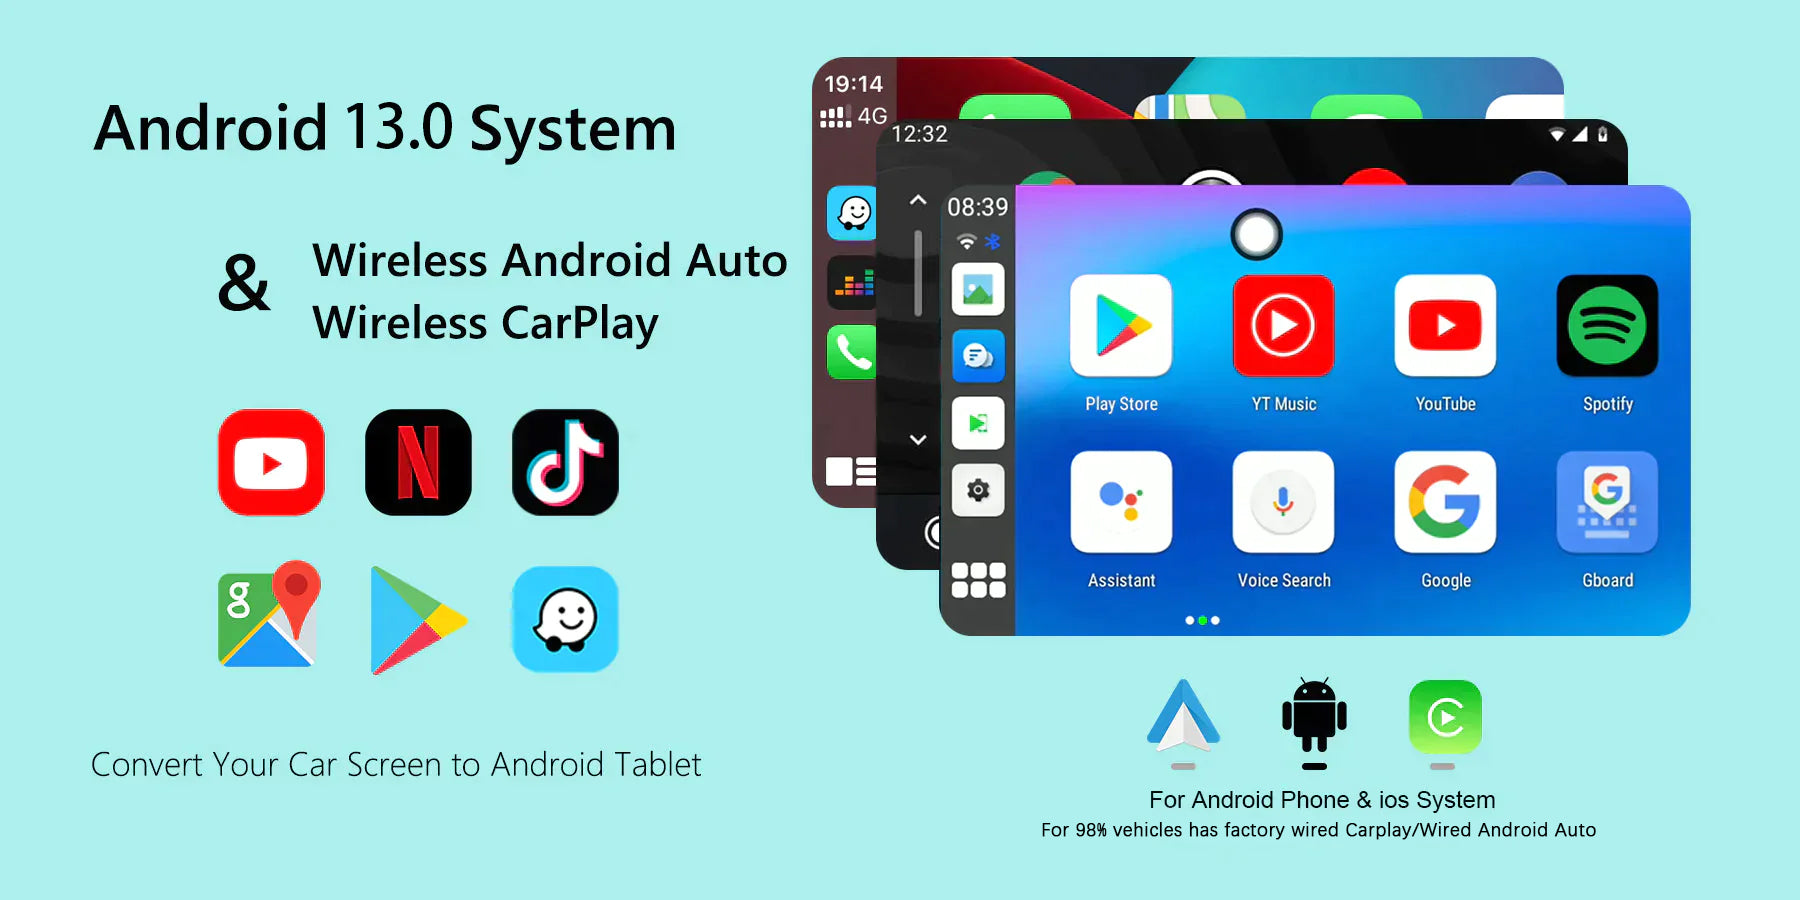 Carlinkit-Tbox-Plus-Wireless-Carplay-Adapter-with-an-Android-13-System